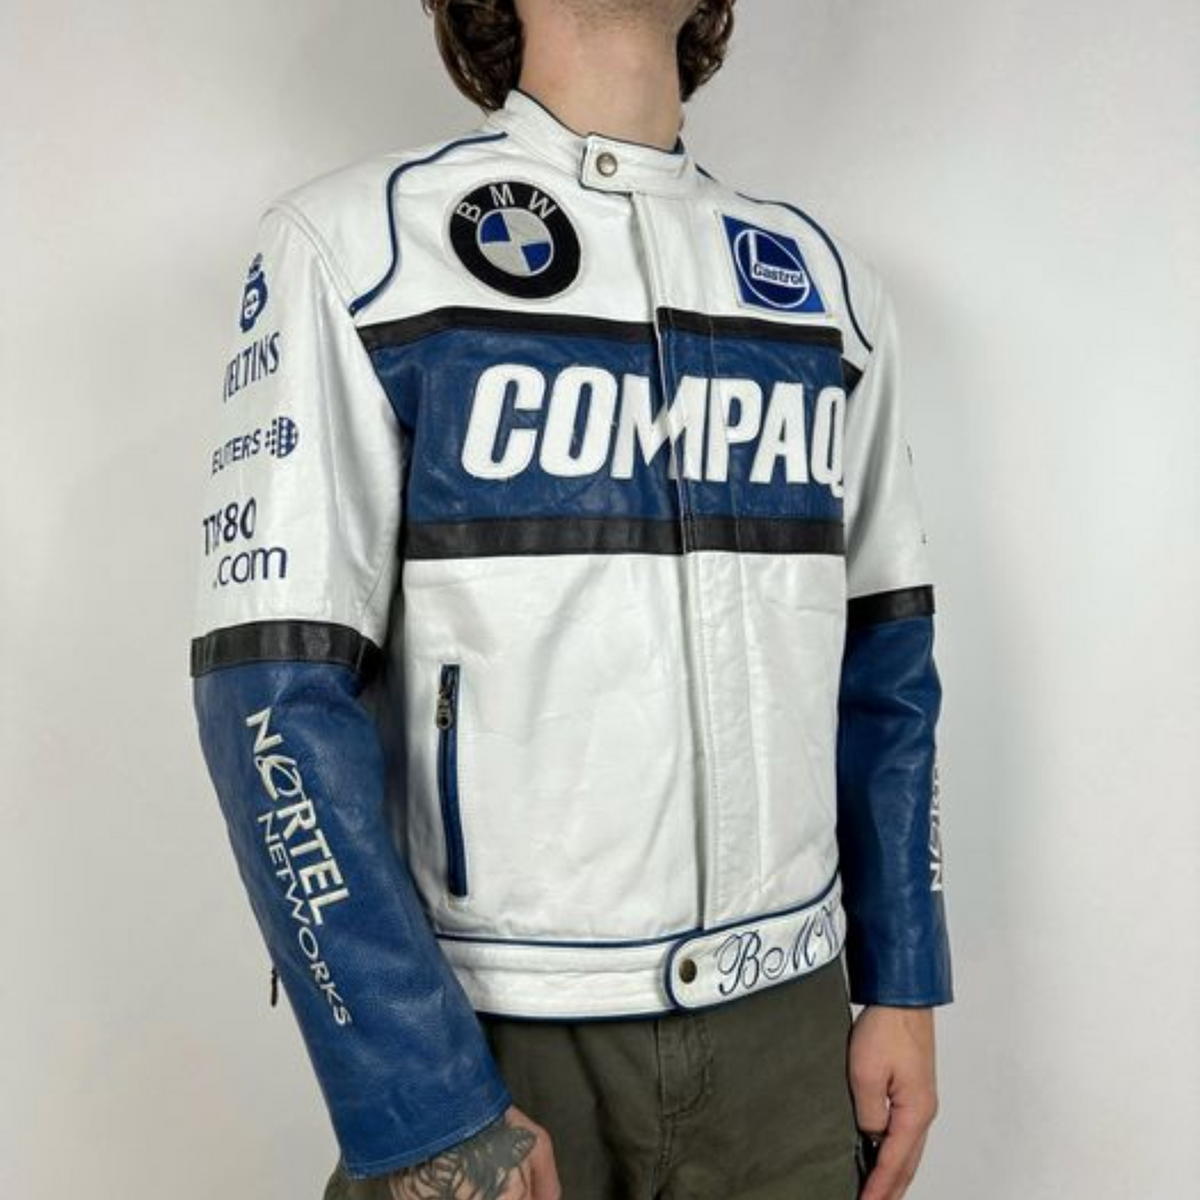 Vintage BMW Top Gear Compaq Racing Leather Jacket: Classic Bike Racing Style